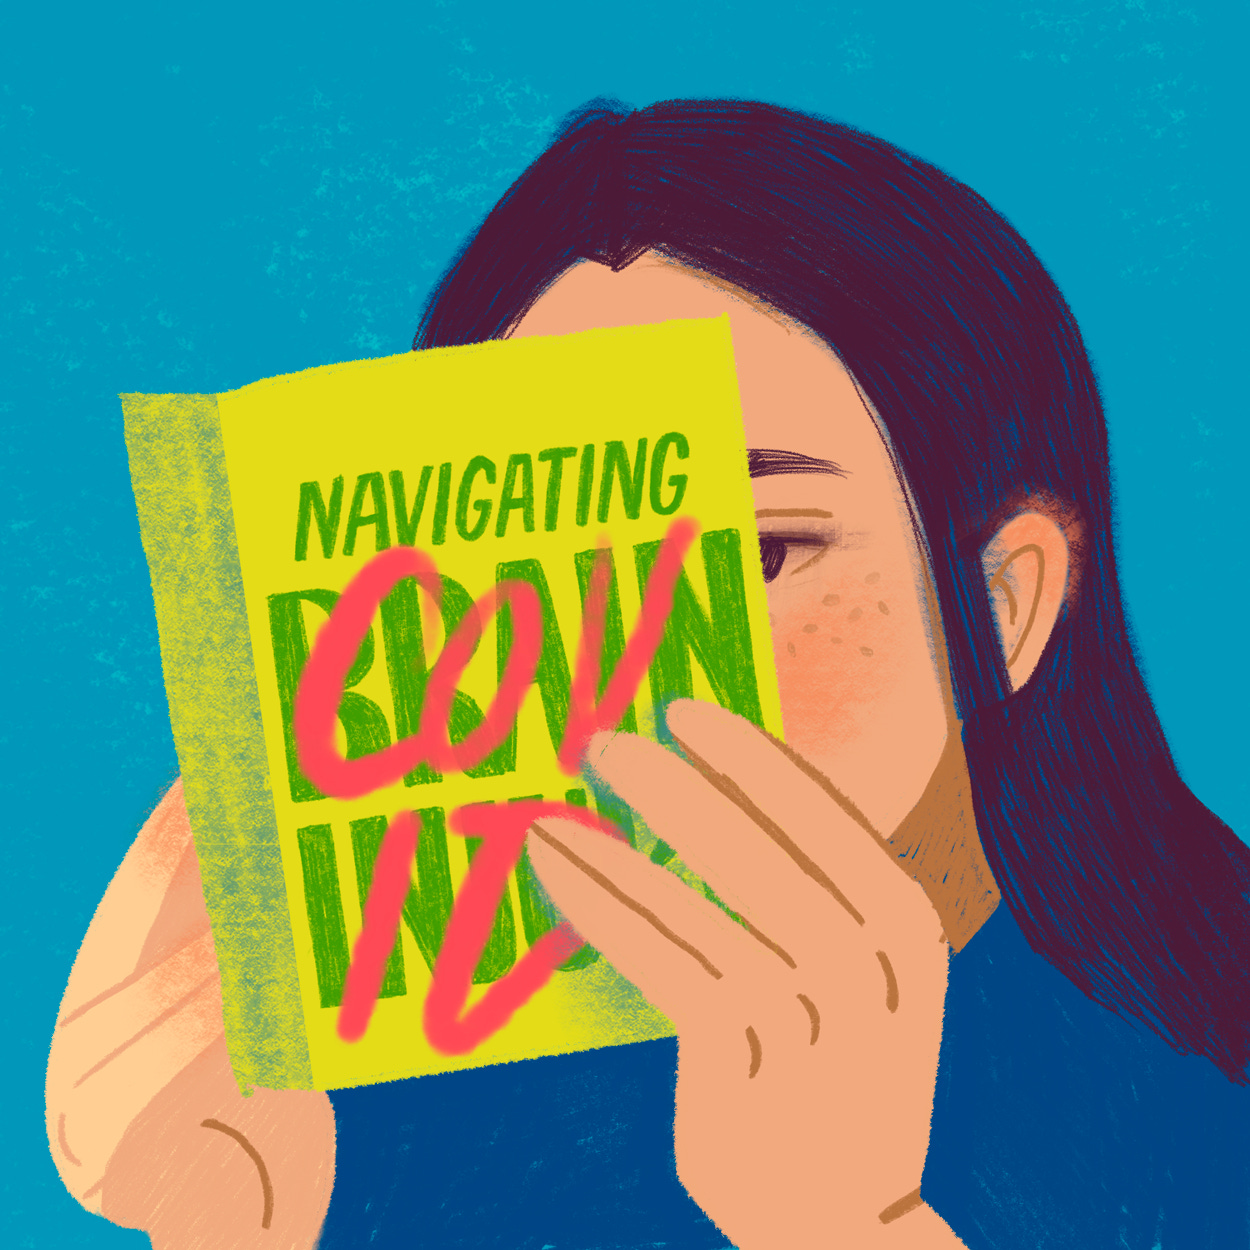 Illustration of a girl reading a book titled 'Navigatin Brain Injury', but 'COVID' is scribbled over the word brain injury.